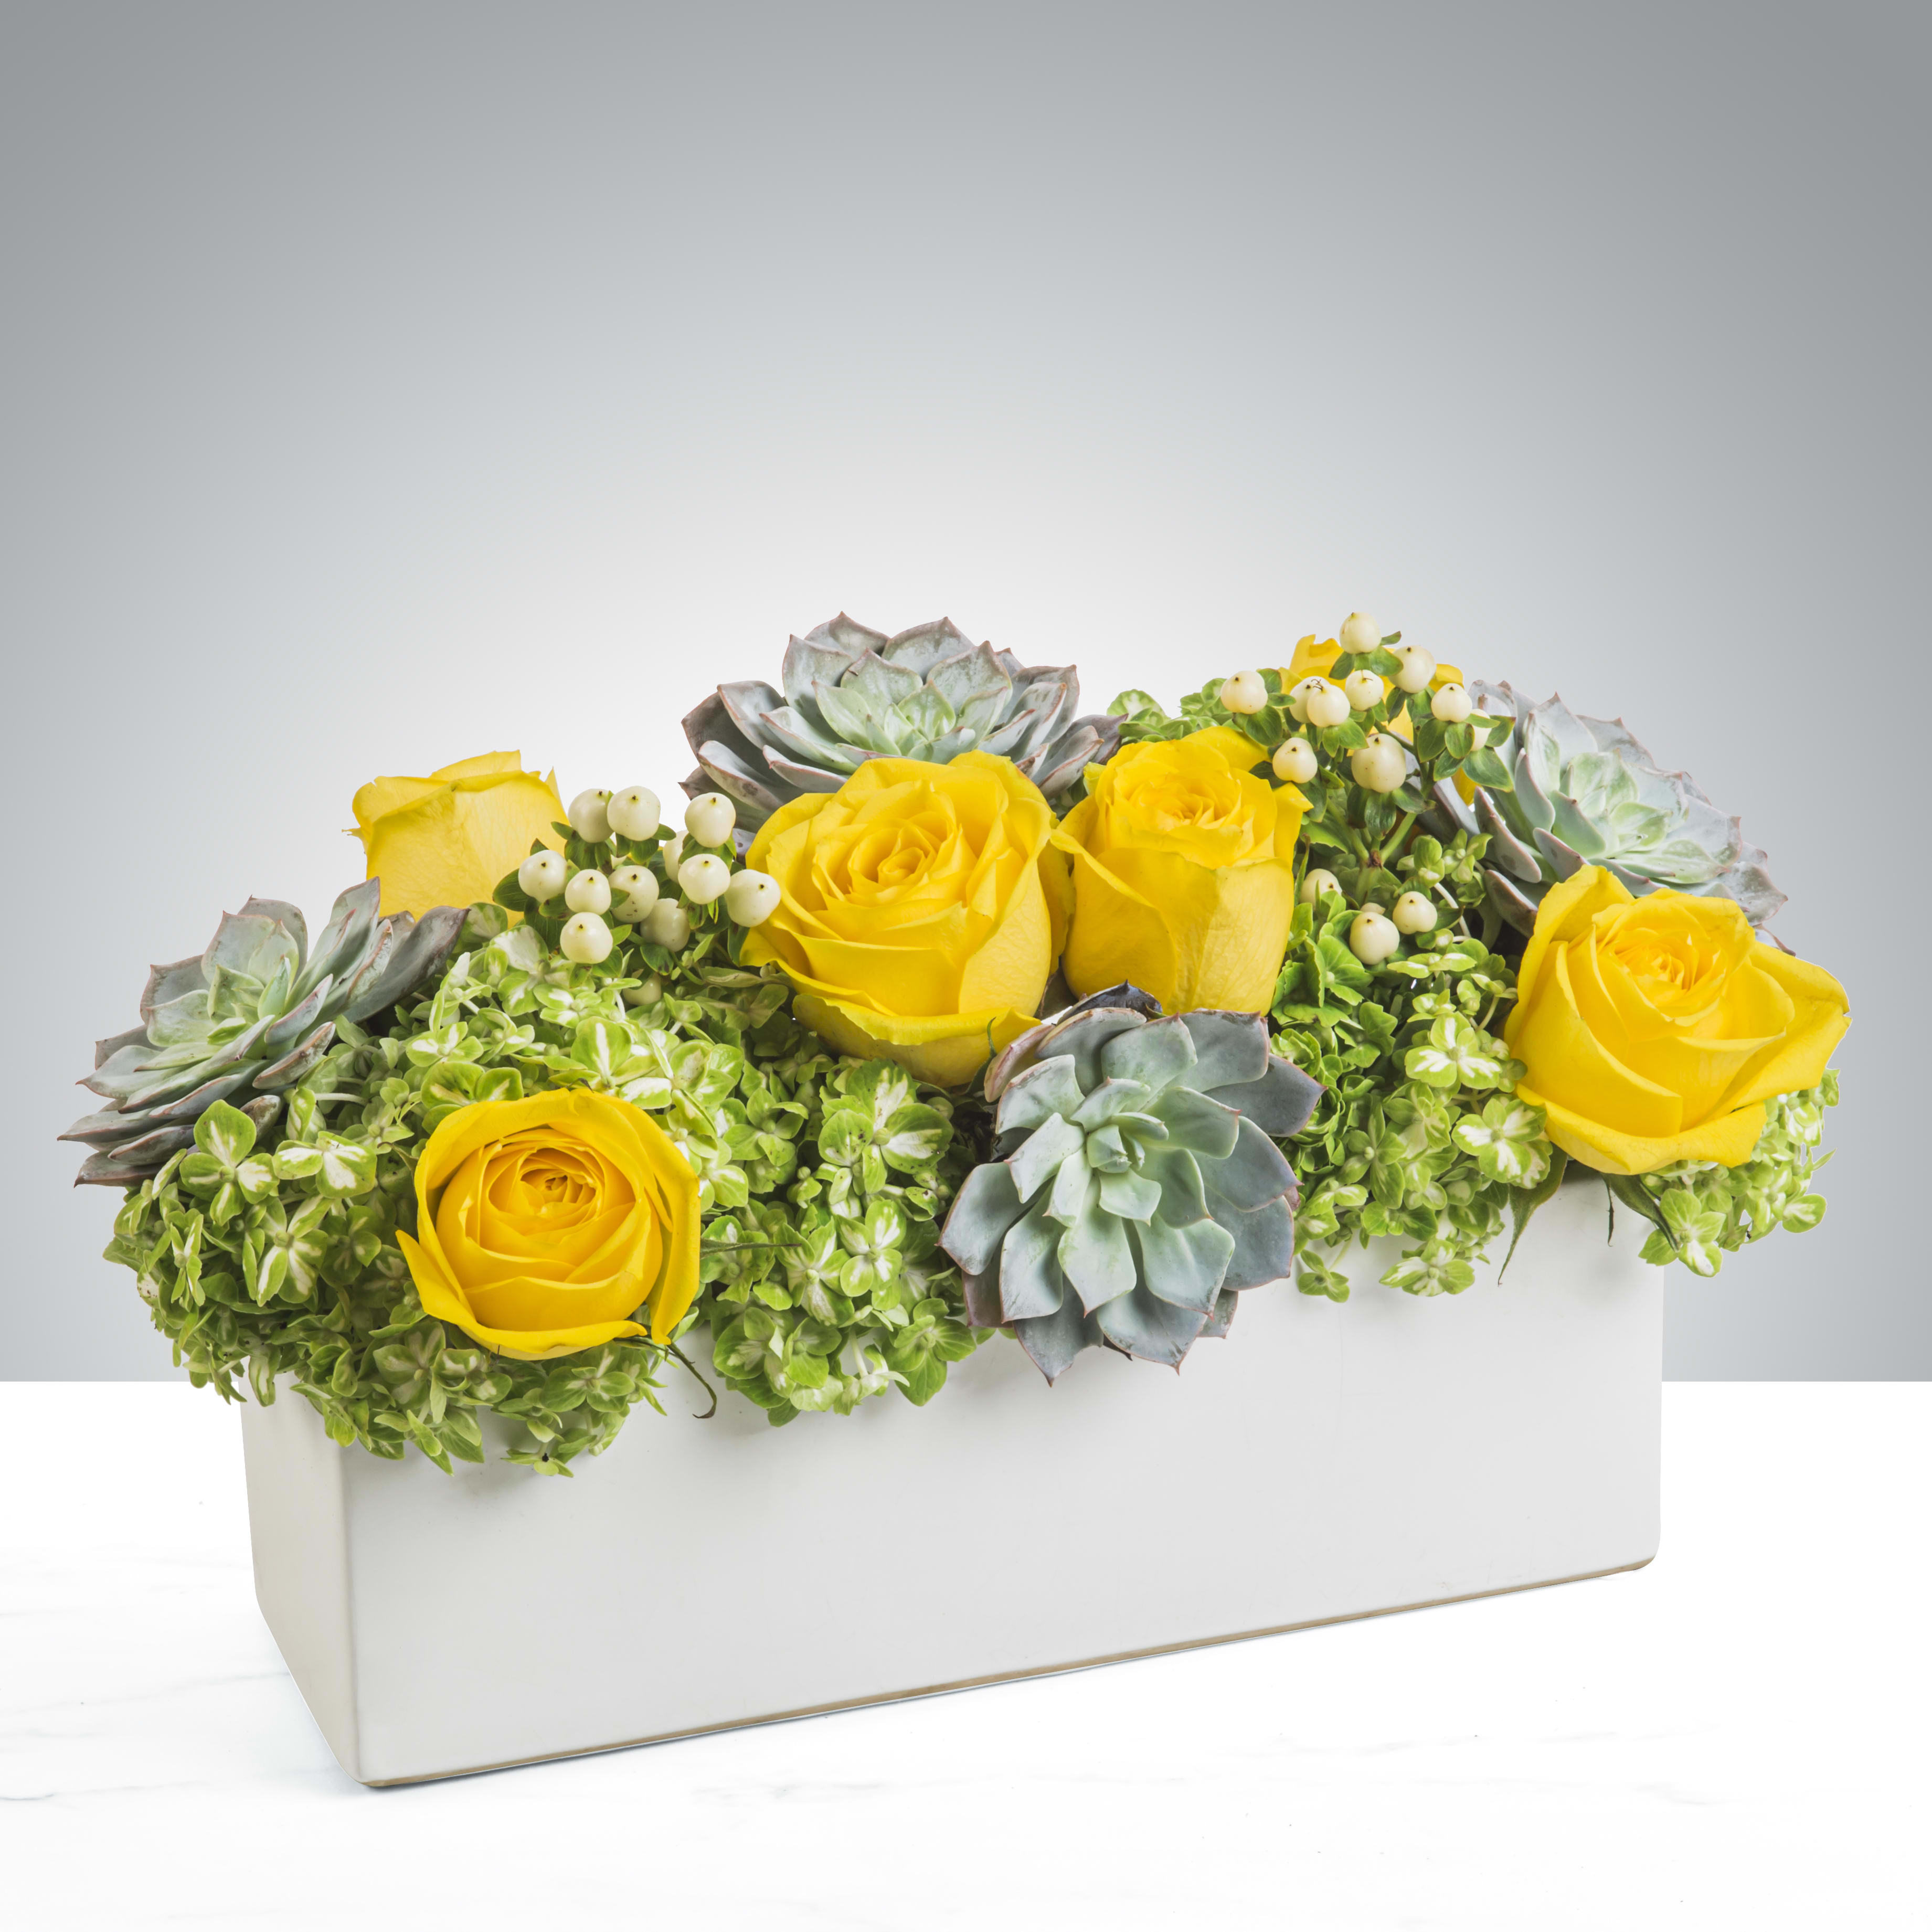 Mellow Yellow by BloomNation™ - Yellow roses with green succulents and a crisp white rectangular box, this arrangement brightens and soothes any space. Perfect for saying happy birthday, welcoming new babies and saying thank you. A crowd pleaser, this arrangement appeals to both the contemporary and the classic.